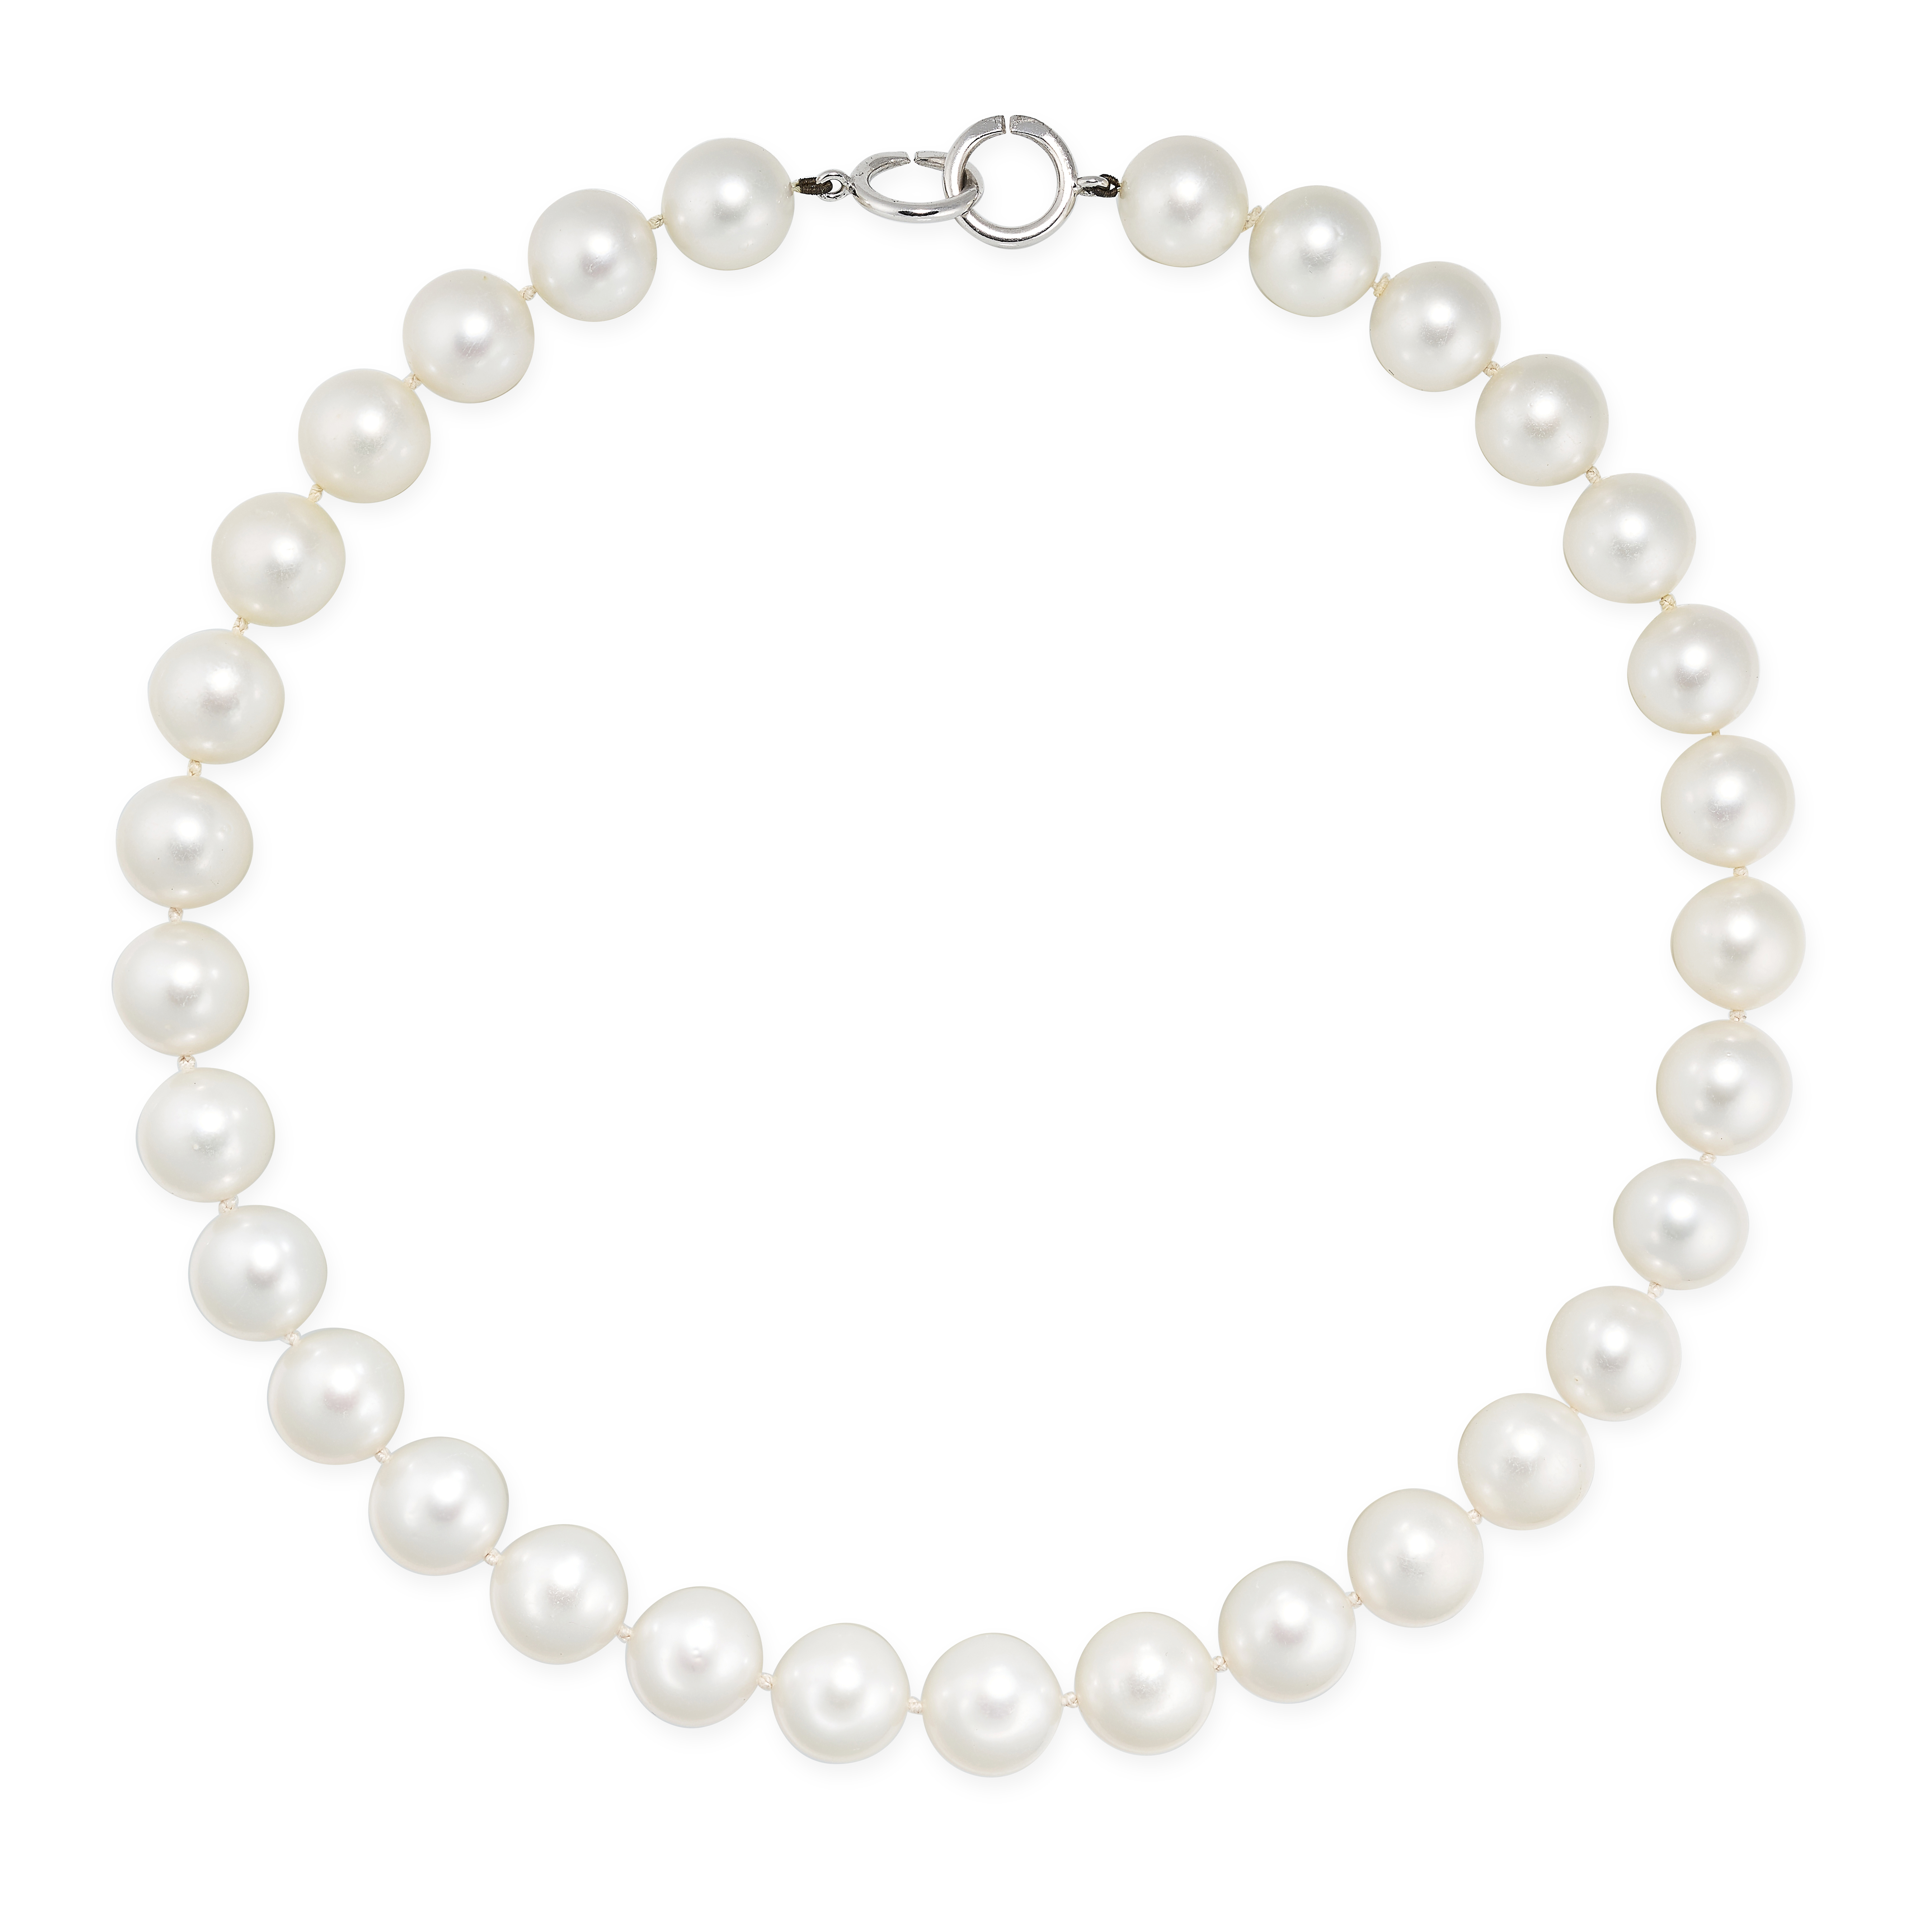 A CULTURED PEARL NECKLACE comprising a single row of thirty-one cultured pearls ranging in size from